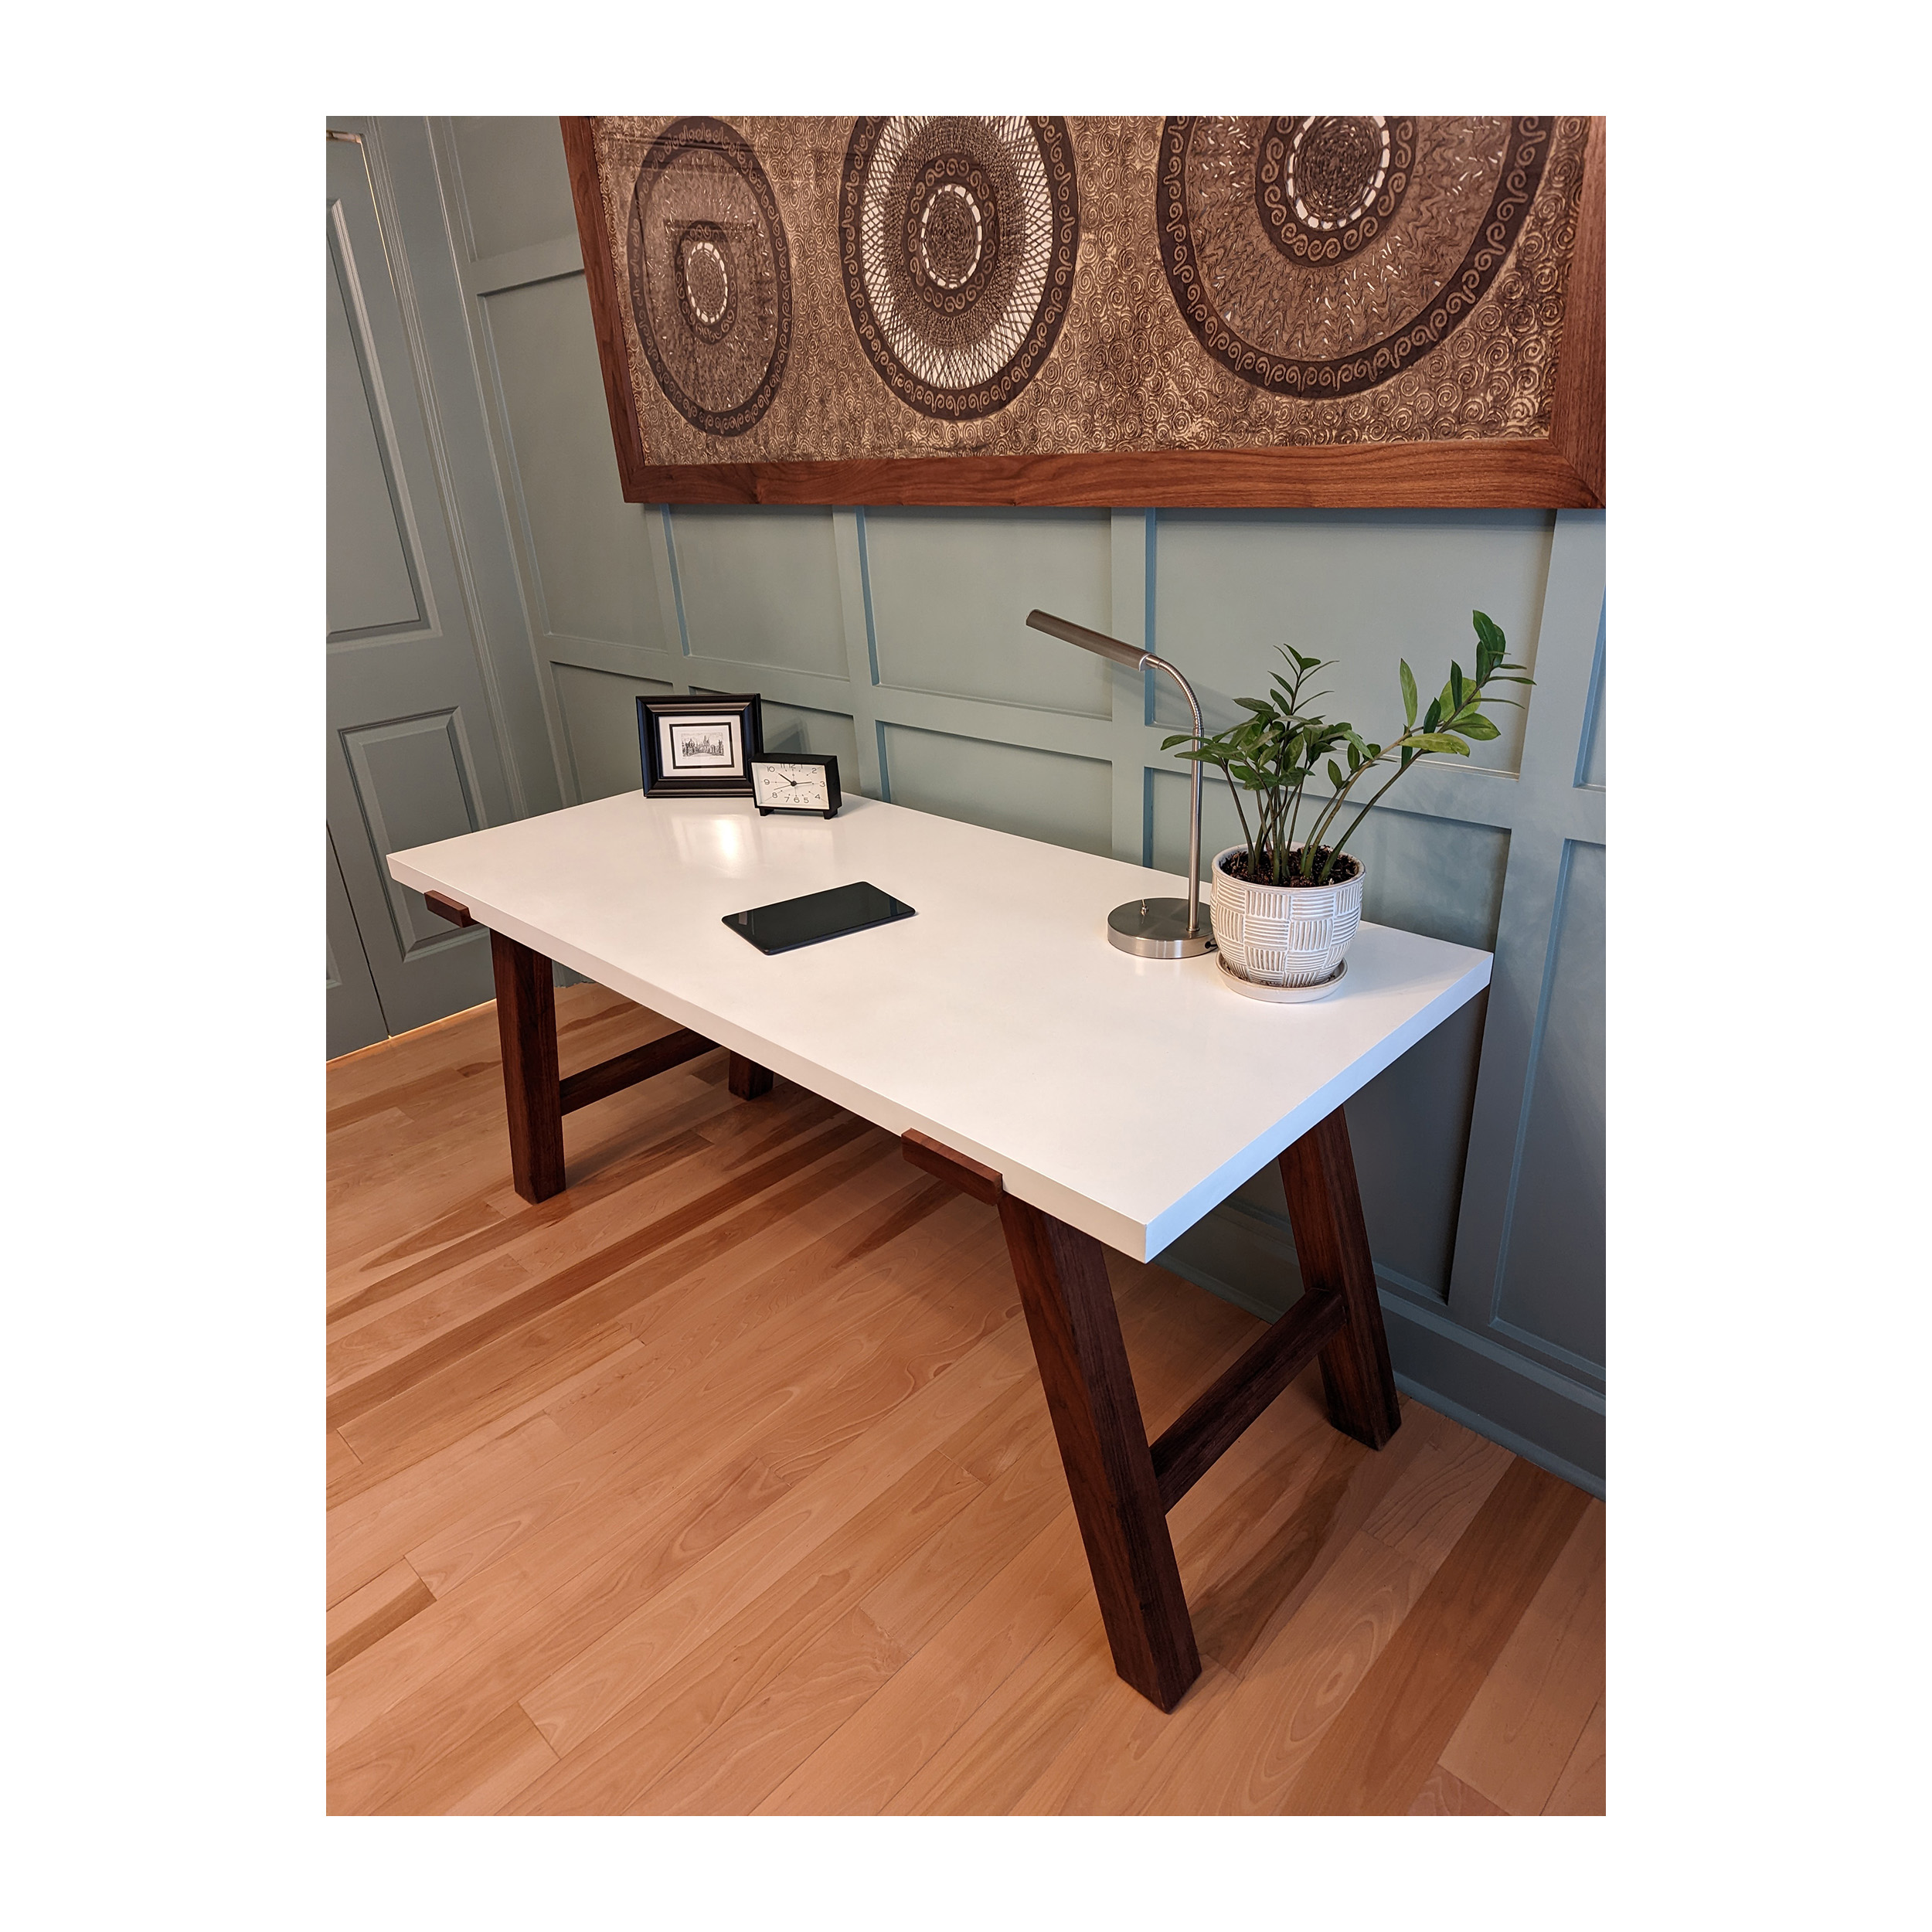 Walnut Modern Desk With A White Top And Solid Wood Construction